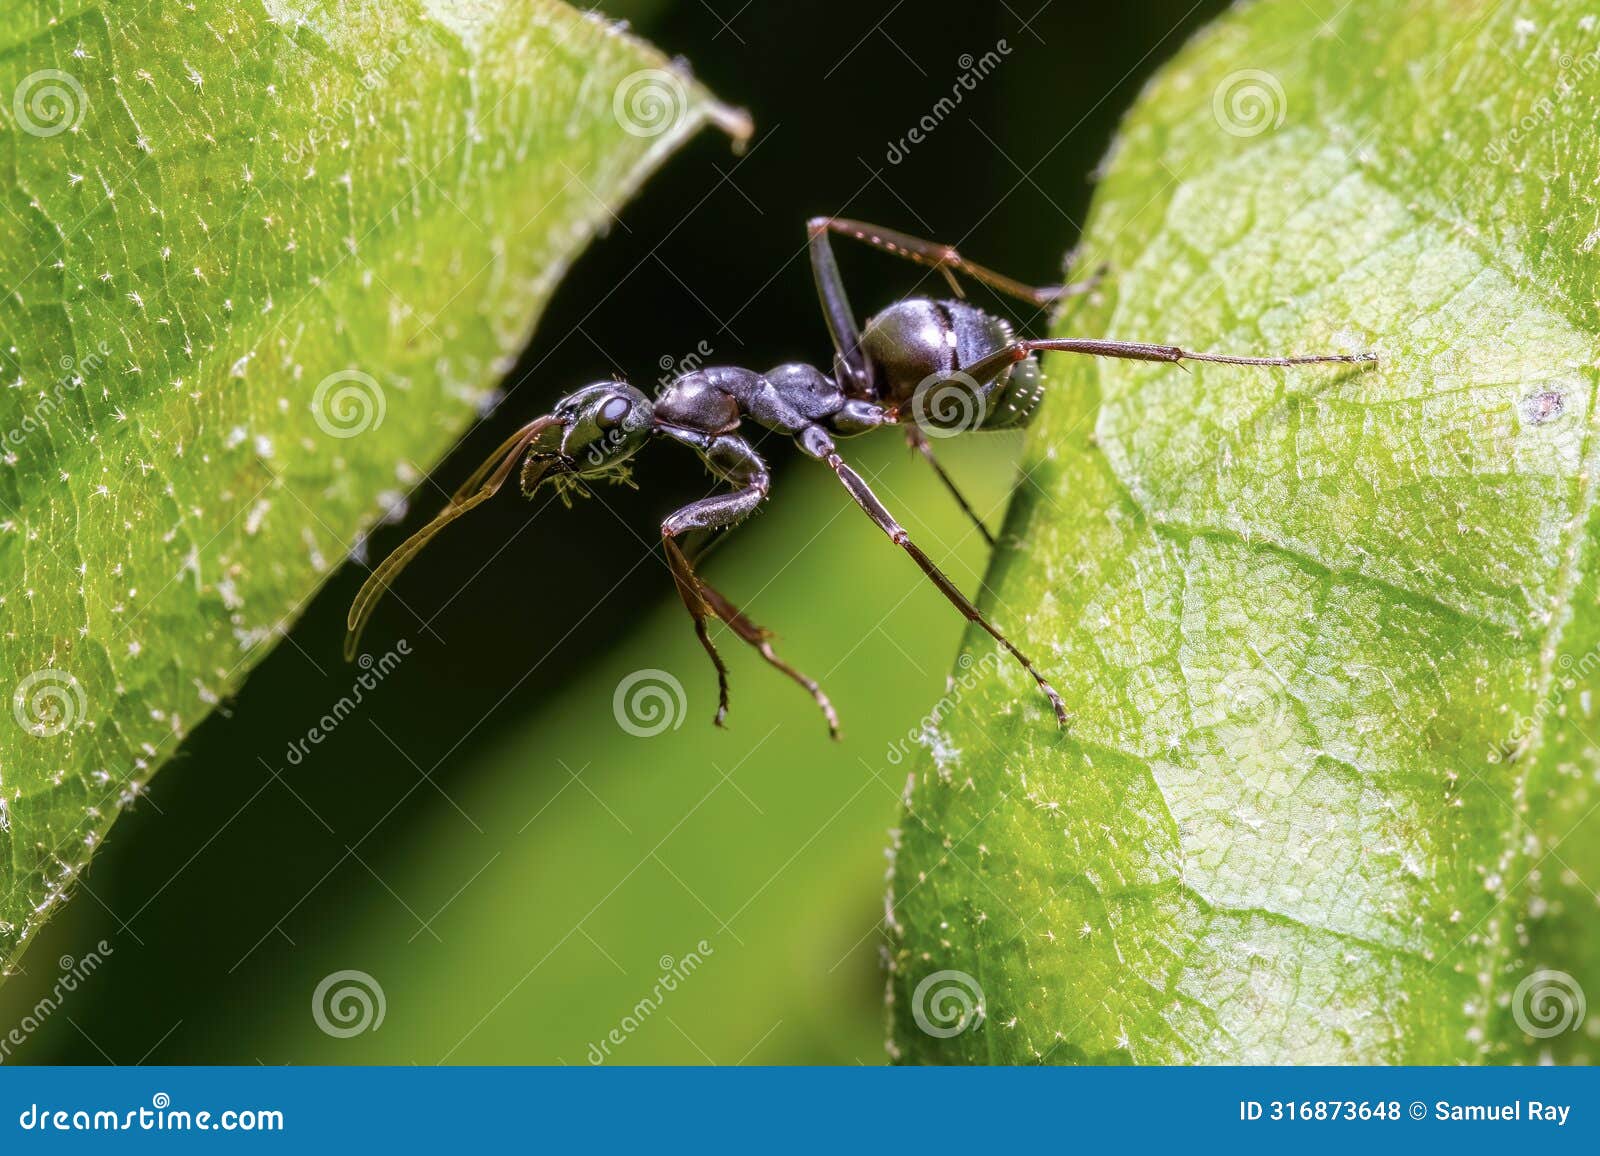 a silky field ant checking to see if the leaf on the other side is greener